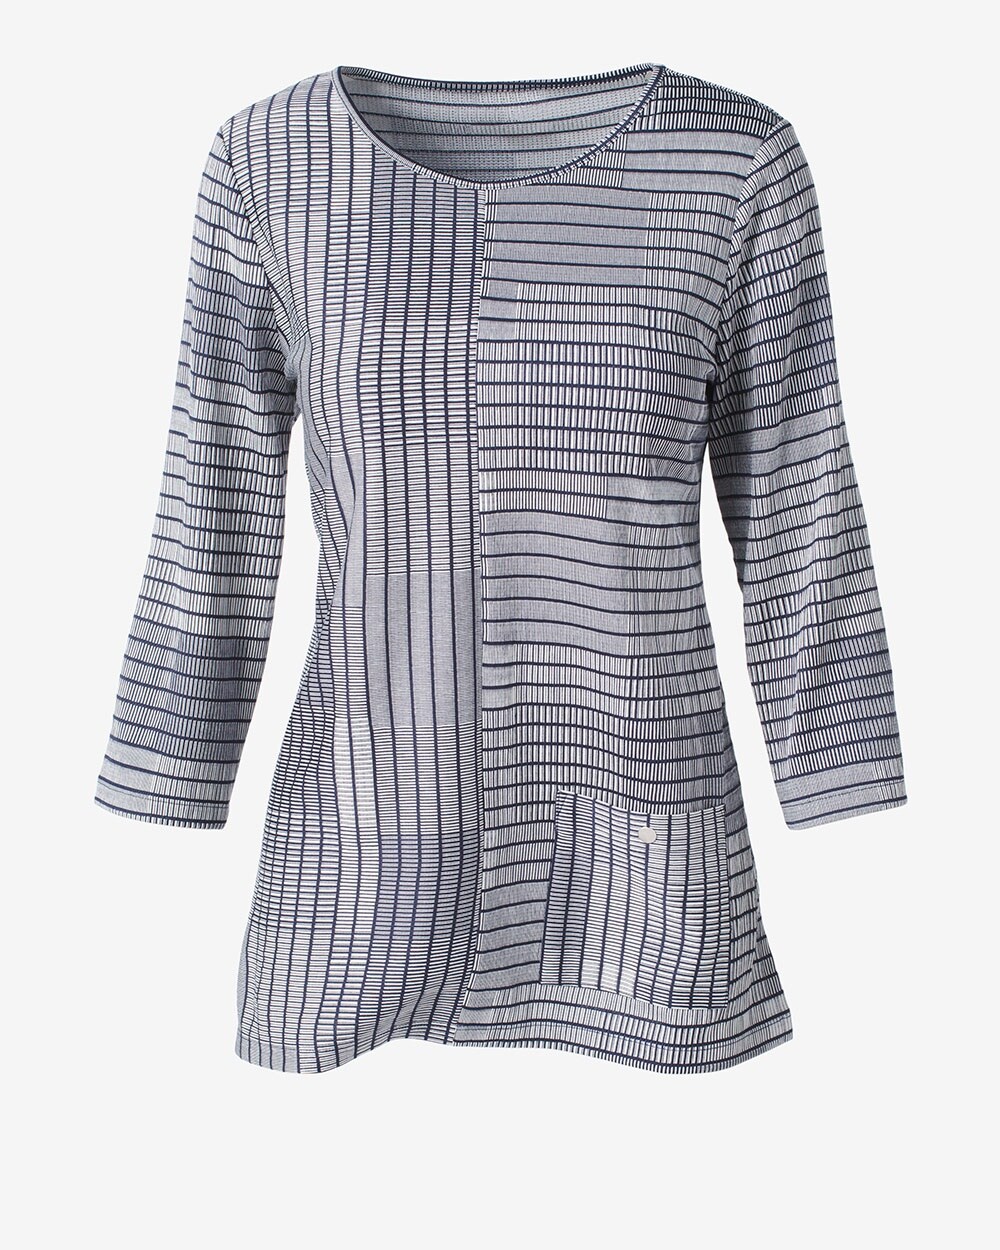 Textured Lines Pocket Tunic